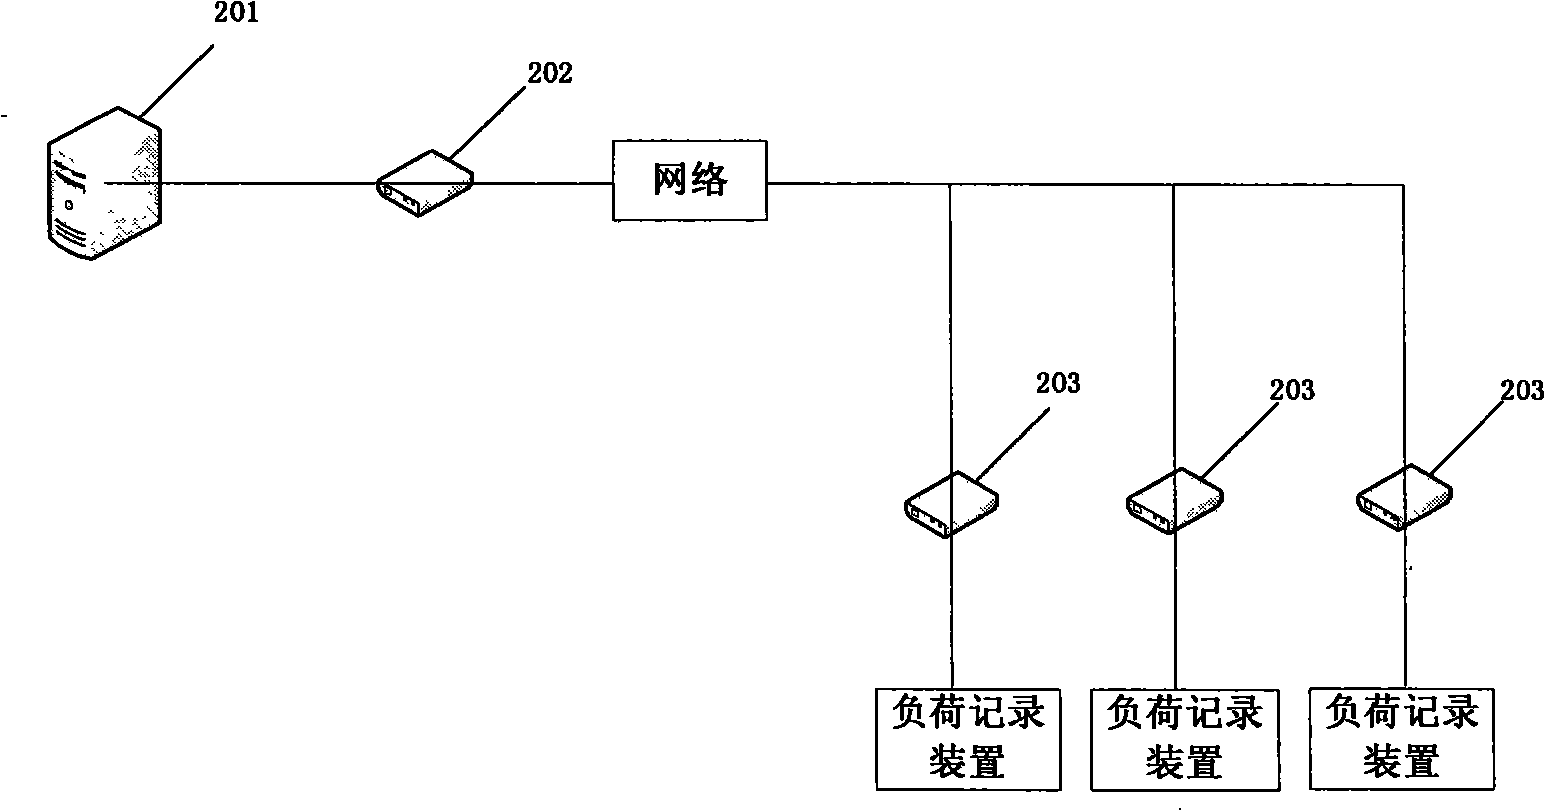 System and method for model building of impact load based on actual measurement